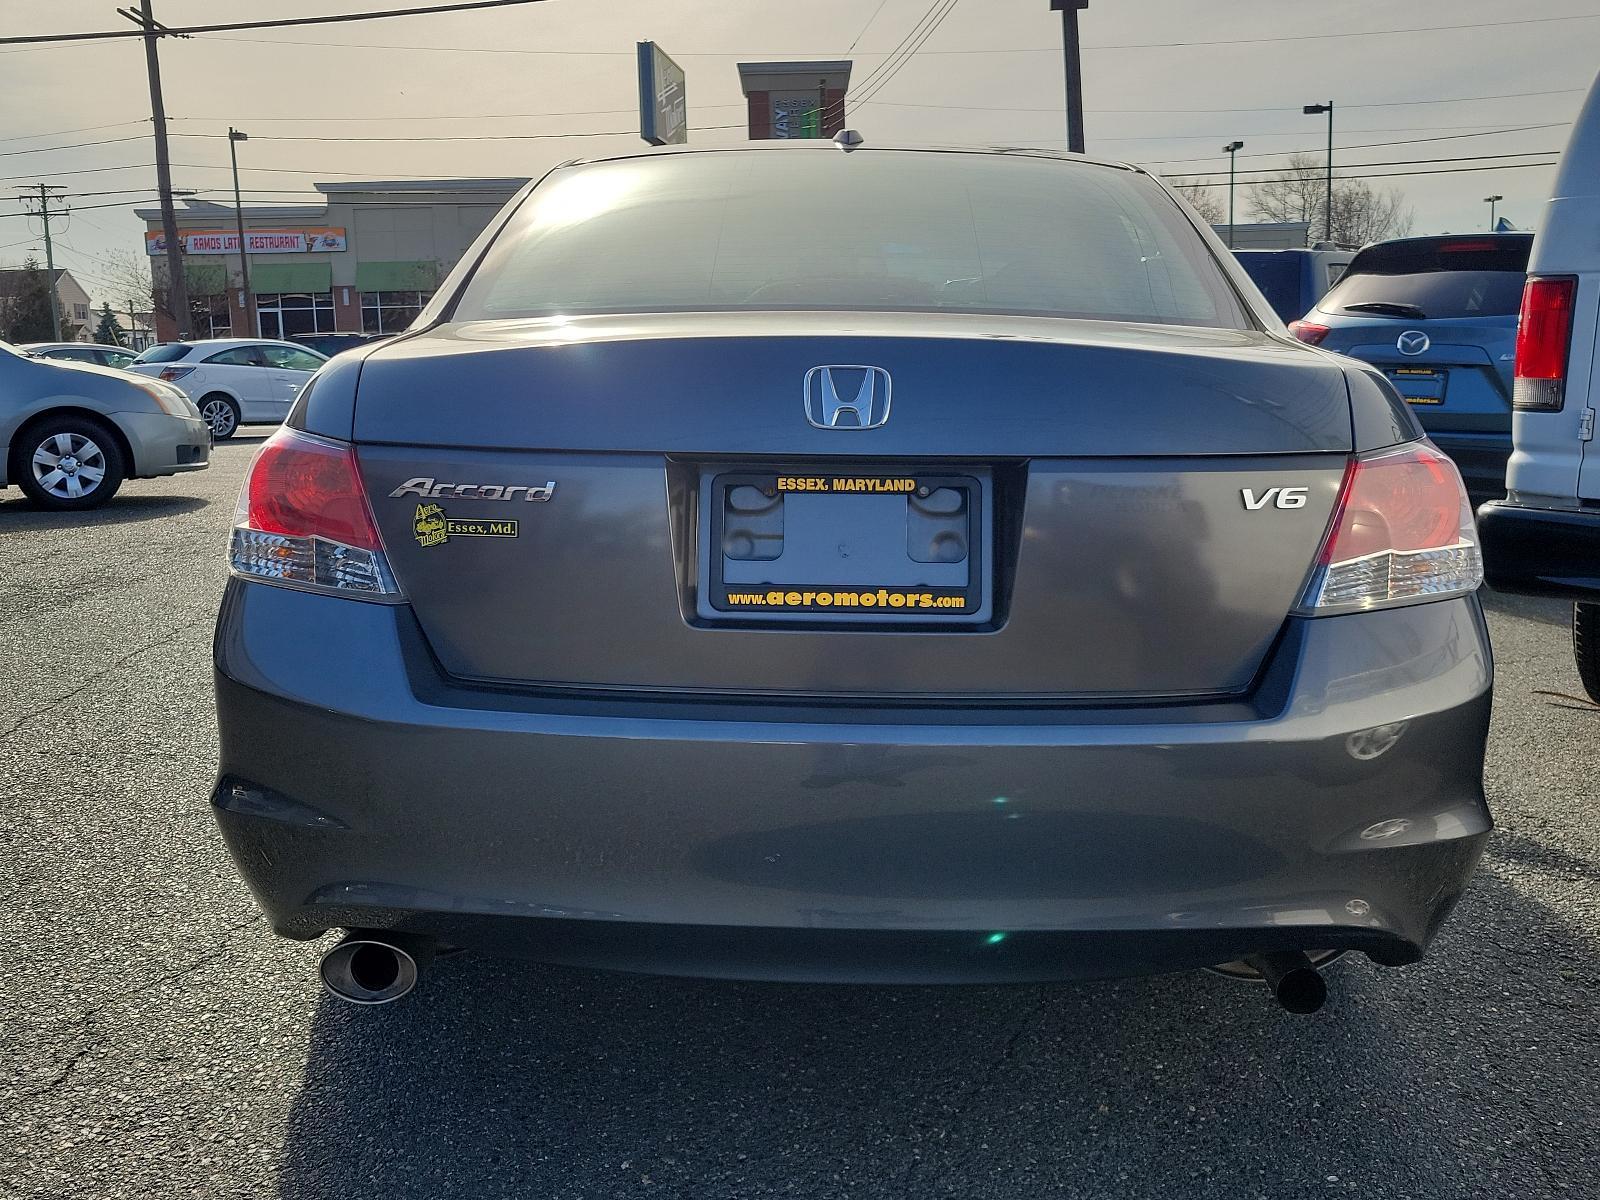 2008 Polished Metal Metallic - GR /Black - BK Honda Accord Sdn EX-L (1HGCP36898A) with an 3.5L SOHC MPFI 24-valve i-VTEC V6 engine engine, located at 50 Eastern Blvd., Essex, MD, 21221, (410) 686-3444, 39.304367, -76.484947 - Presenting the robust and dependable 2008 Honda Accord Sdn EX-L 4dr V6, presented in a timeless gray exterior. This fantastic sedan breathes power with its 3.5l SOHC MPFI 24-valve i-VTEC V6 engine, combining both performance and efficiency seamlessly. The EX-L trim adds a touch of luxury with cozy l - Photo #4